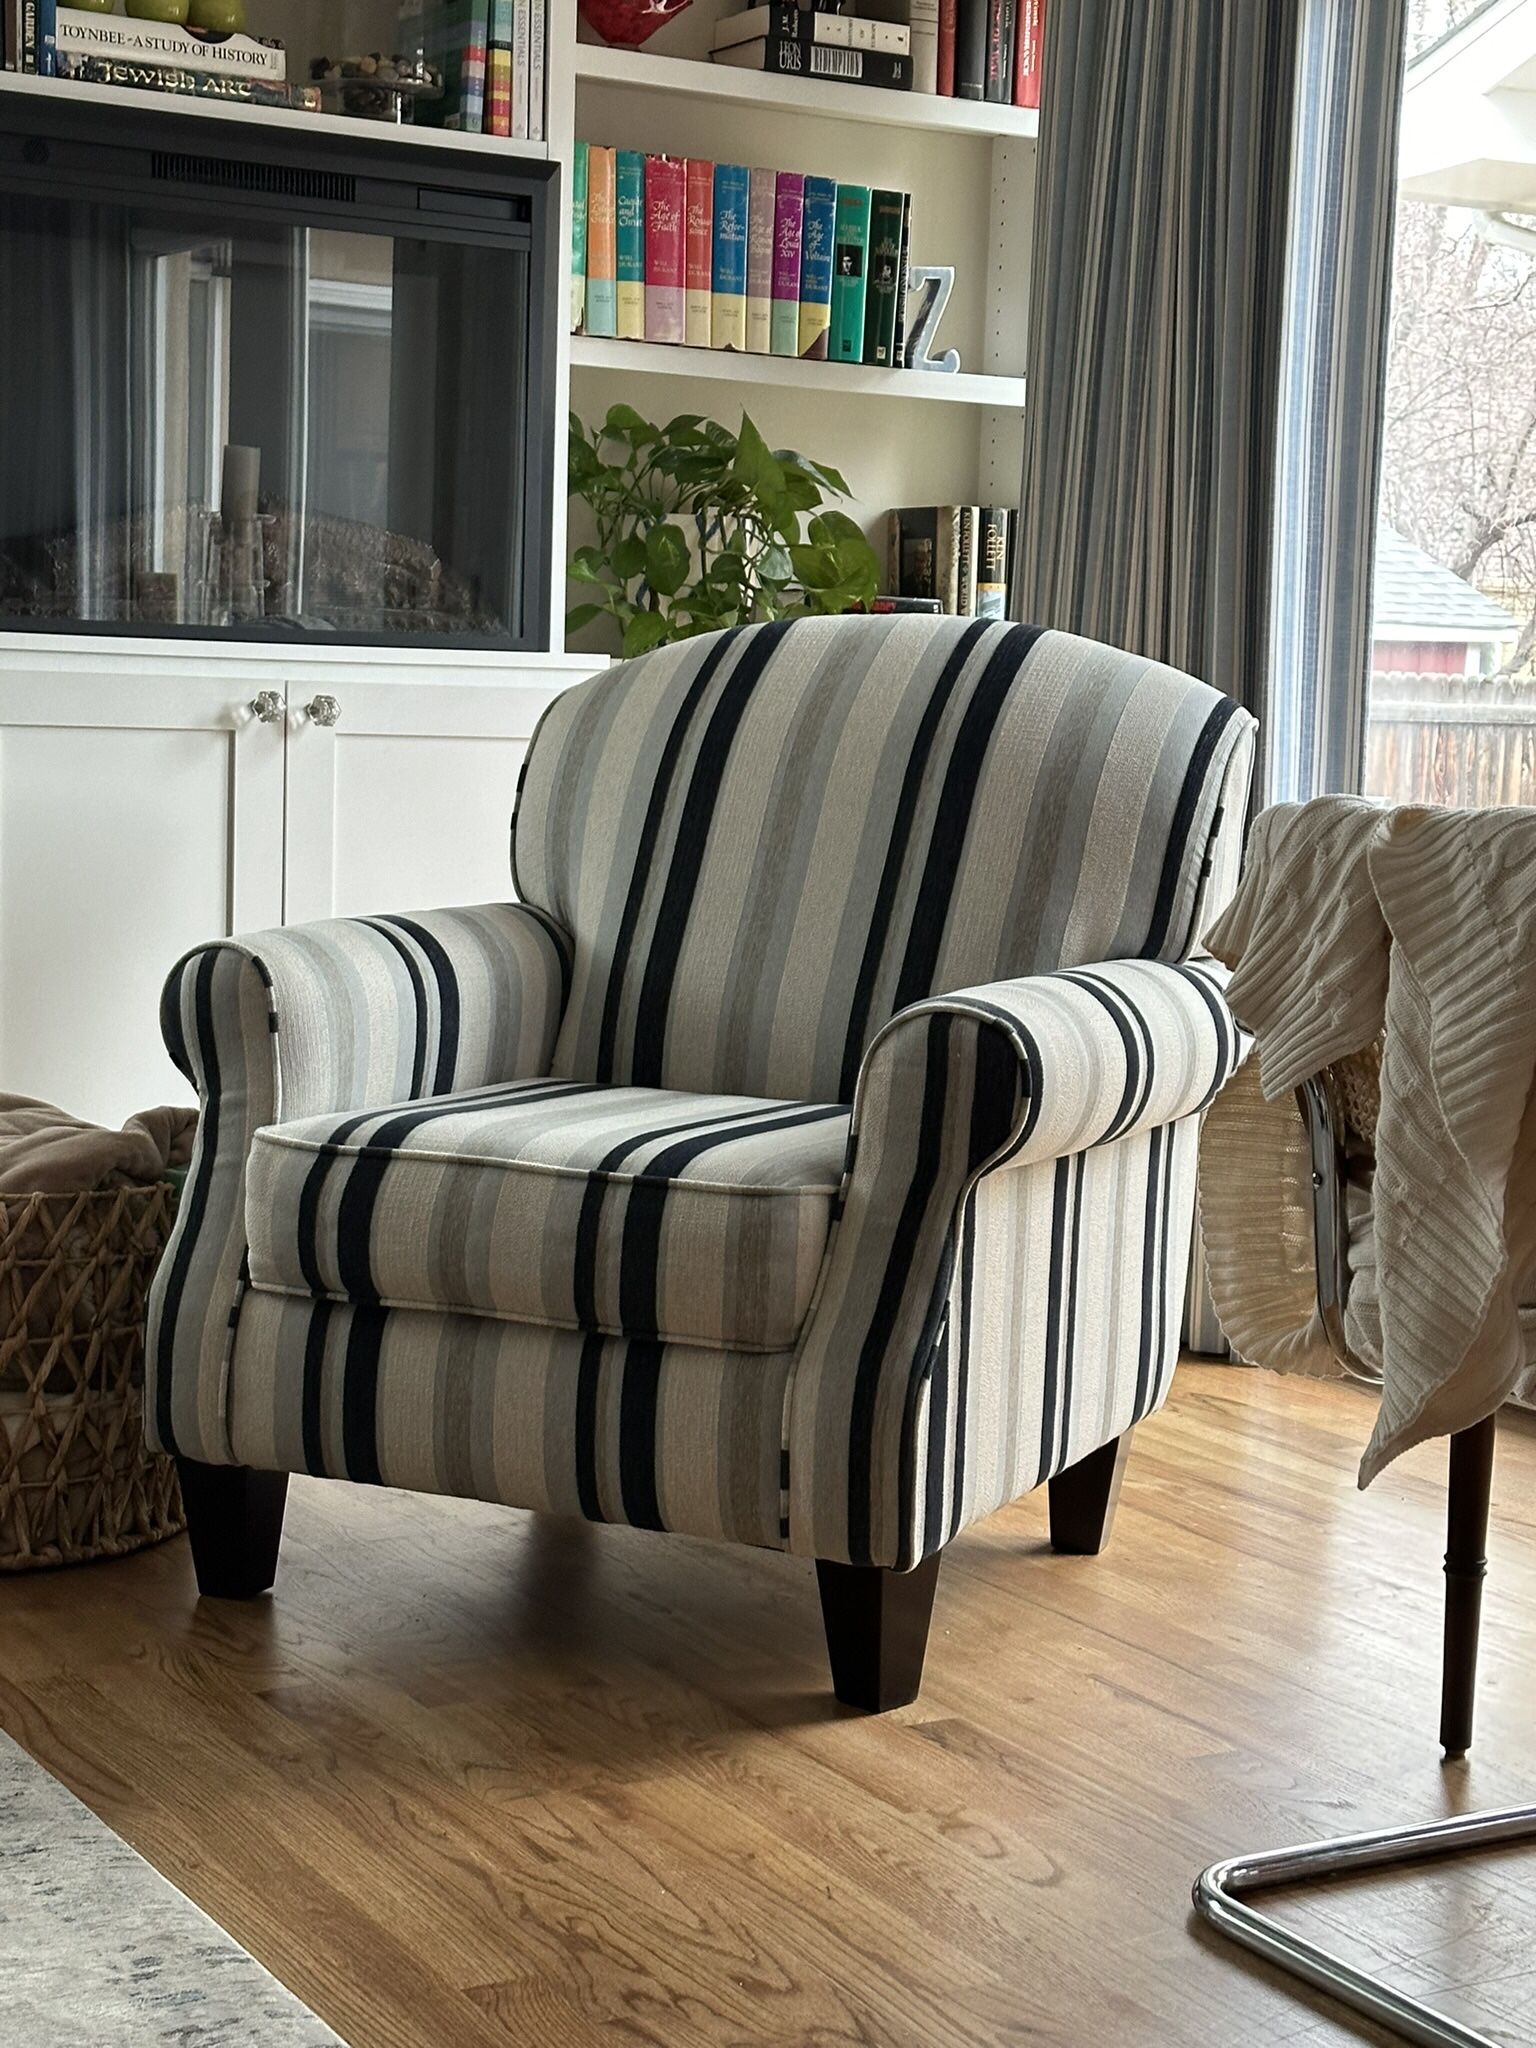 Stunning Arm Chair- Price reduced